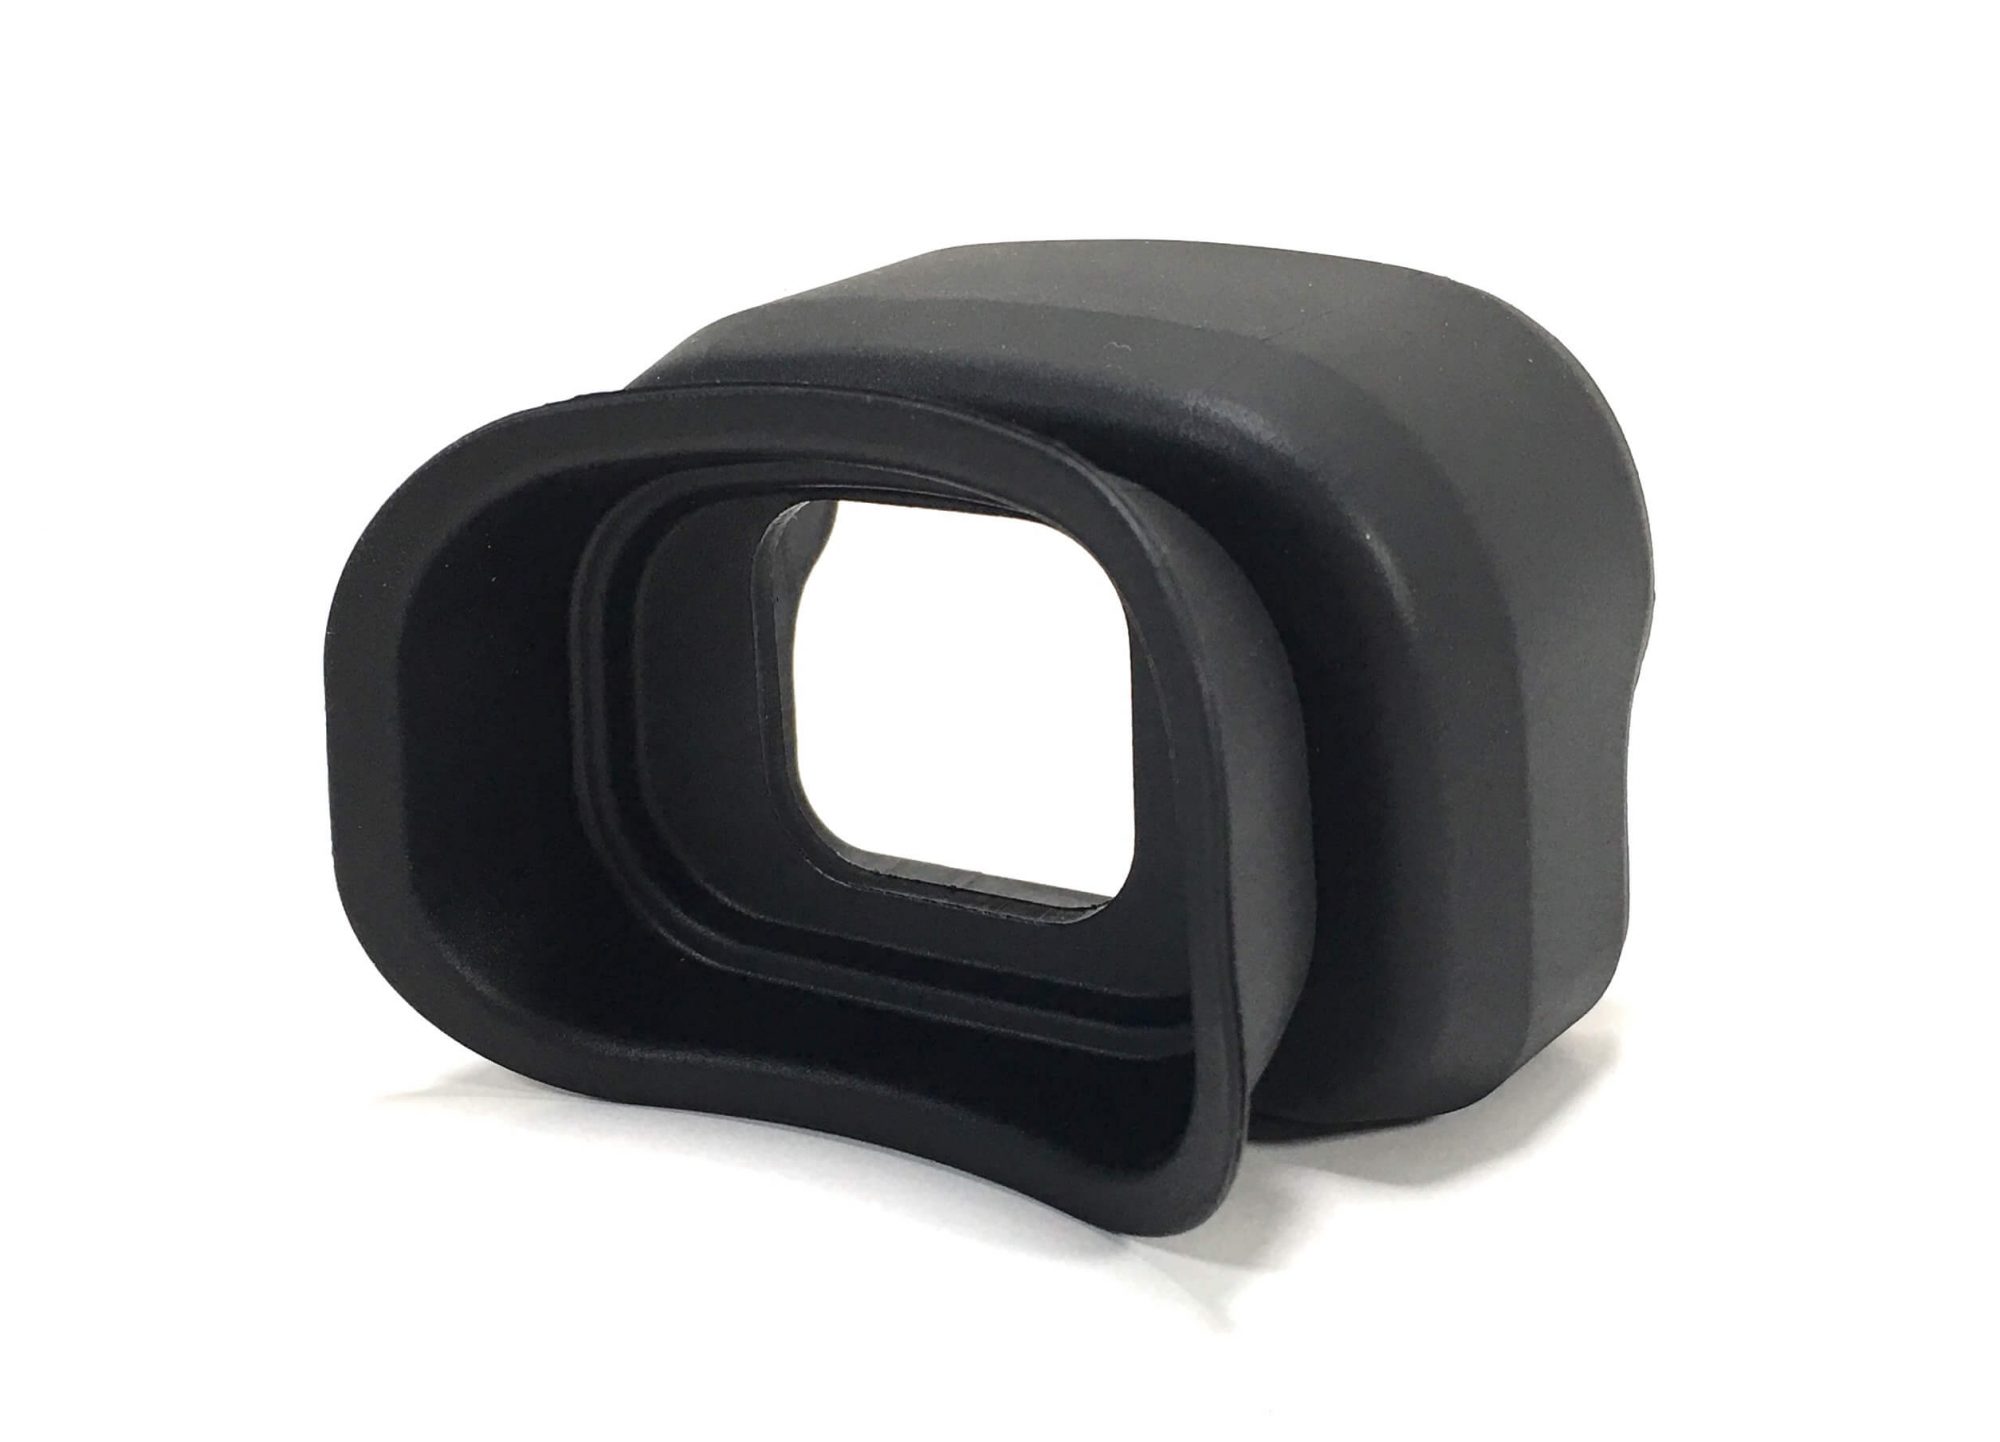 Original Eye Piece that fits on the the Canon XC10 camcorder. It is a genuine Canon part, sourced directly from Canon USA. Brand new factory fresh. Free Shipping.